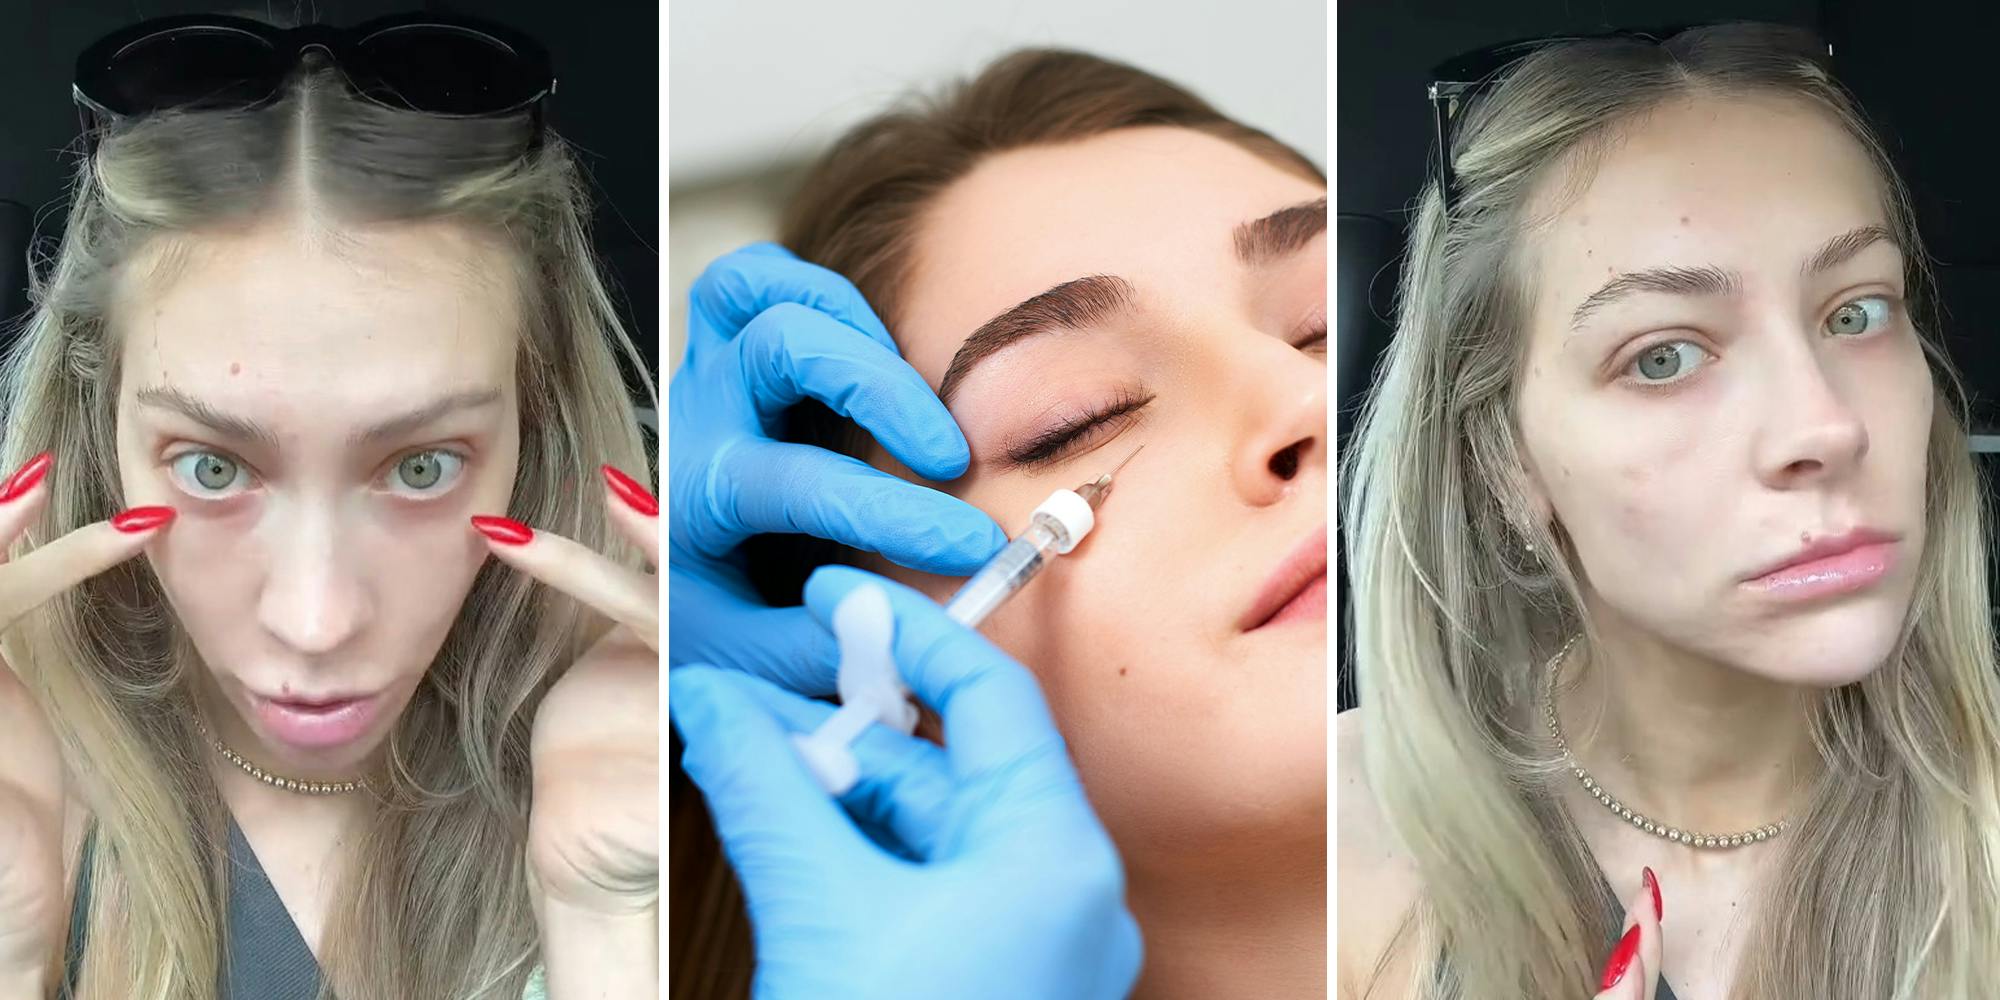 ‘I notice these 2 dimples’: Woman warns against under eye filler, shares why she regrets it 2 years later